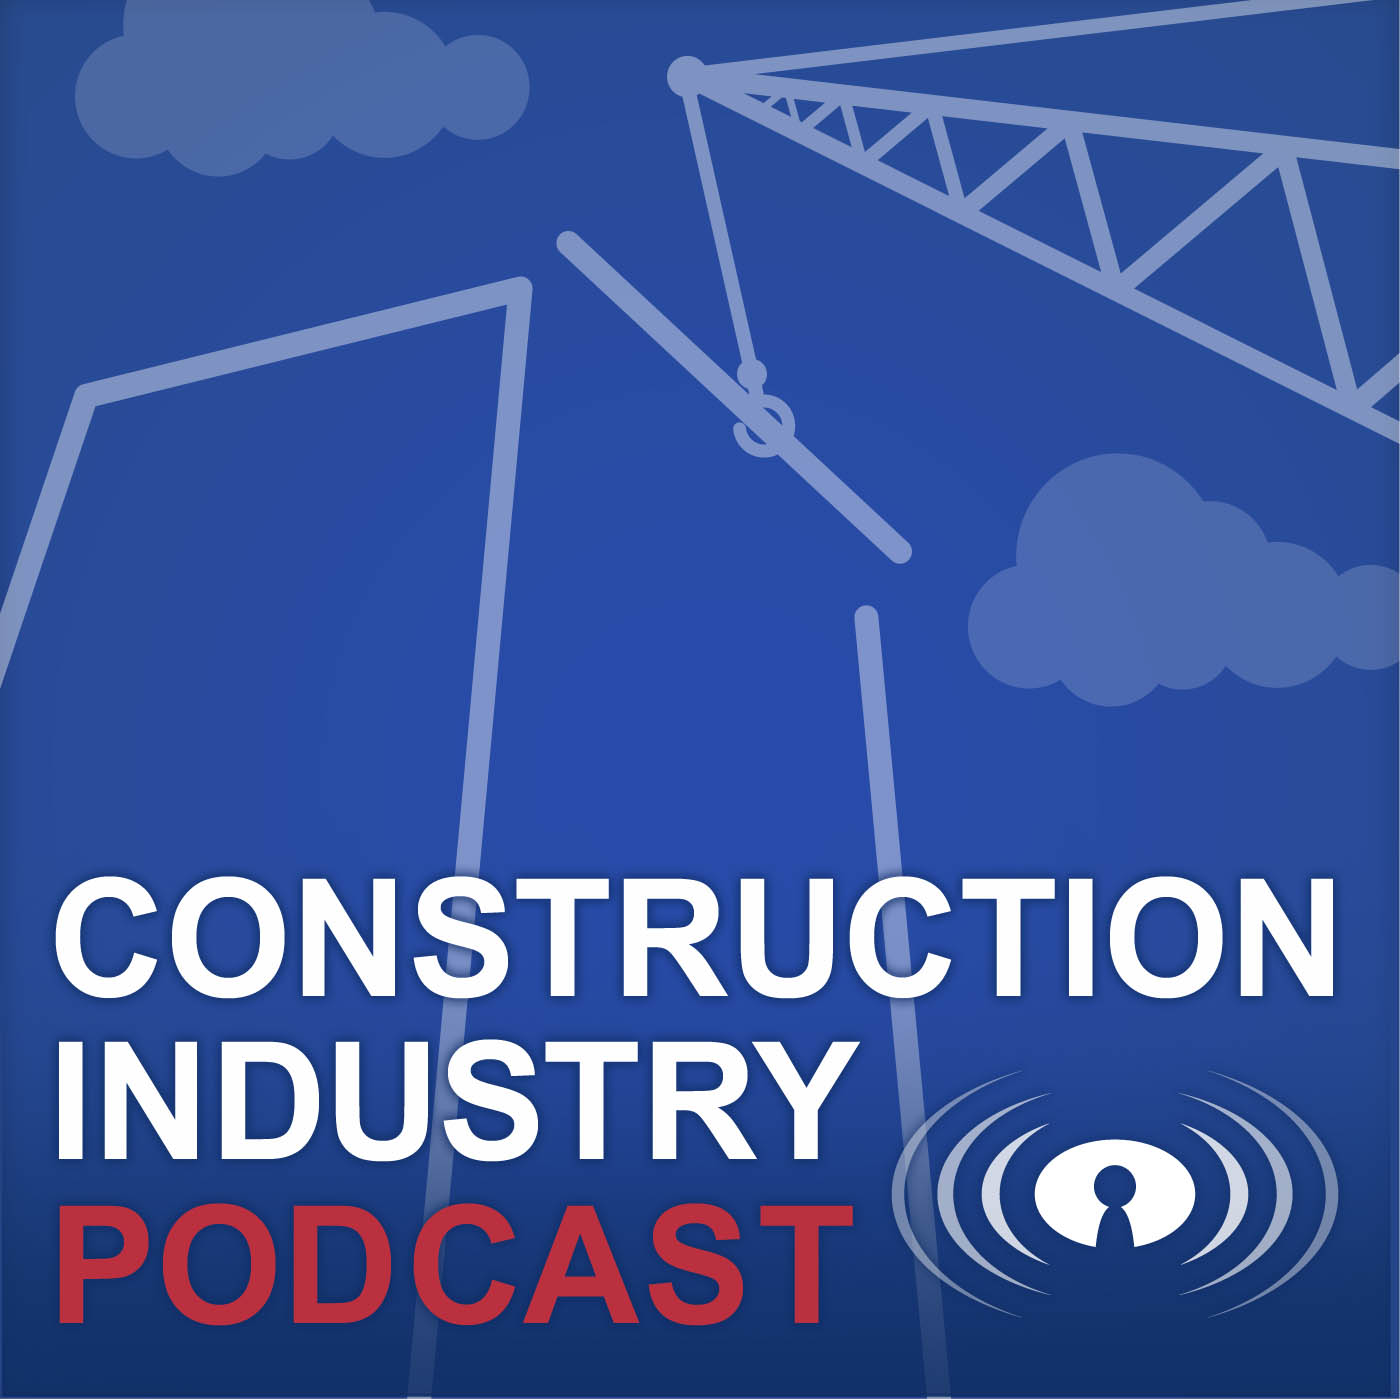 Construction Industry Podcast with Cesar Abeid artwork